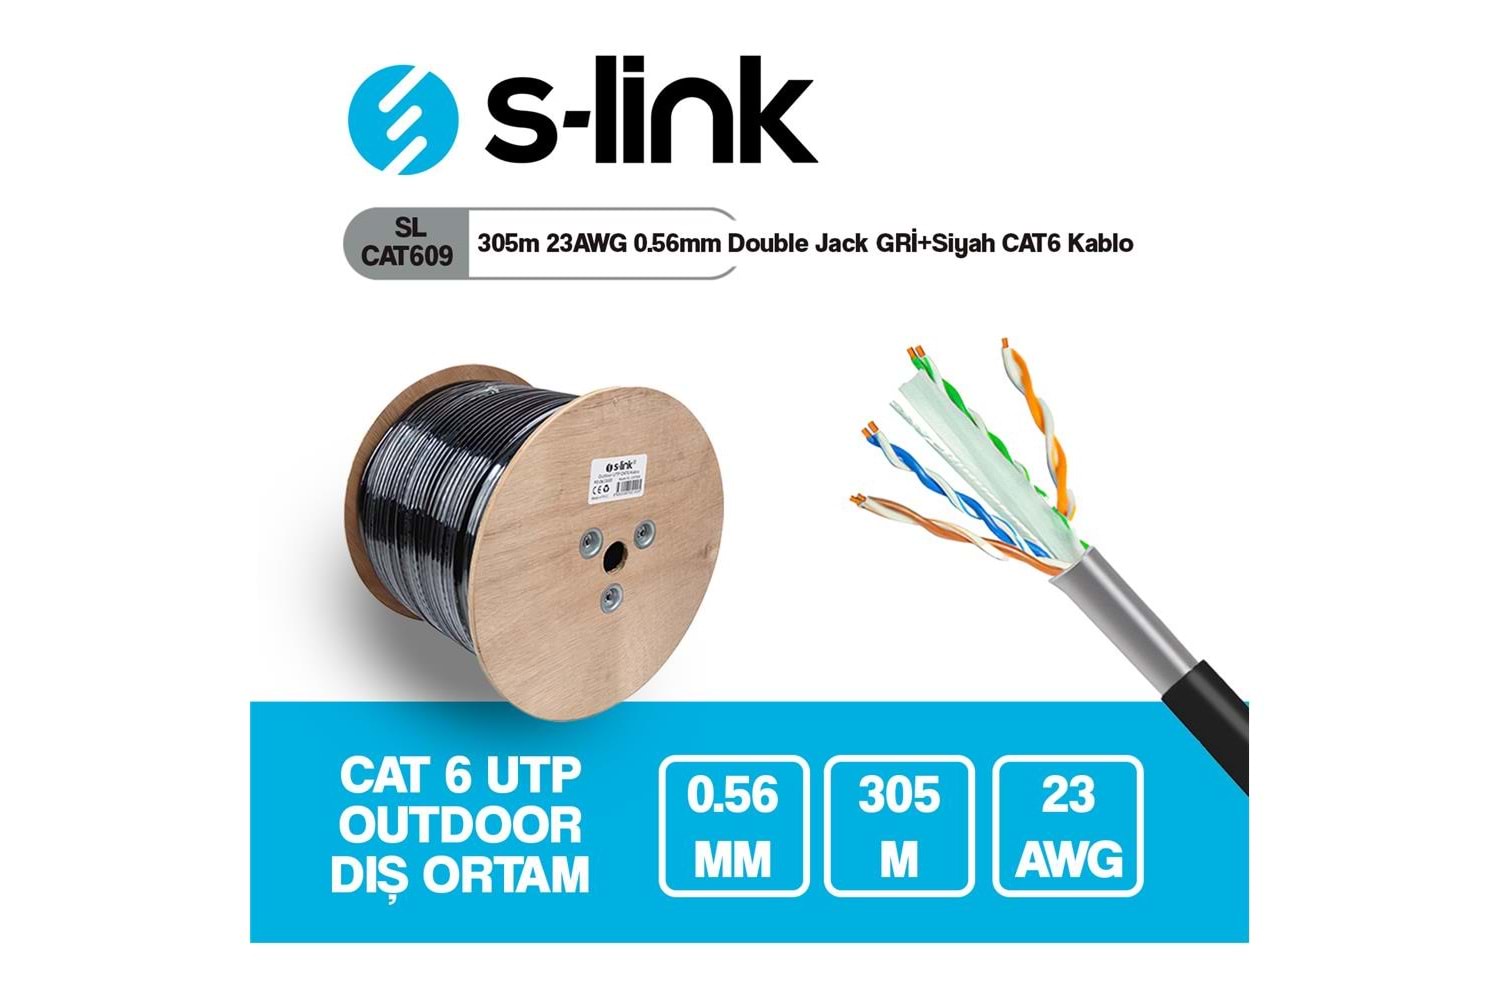 S-link SL-CAT609 305m 23AWG 0.56mm CCA Double Jack GRİ+Siyah